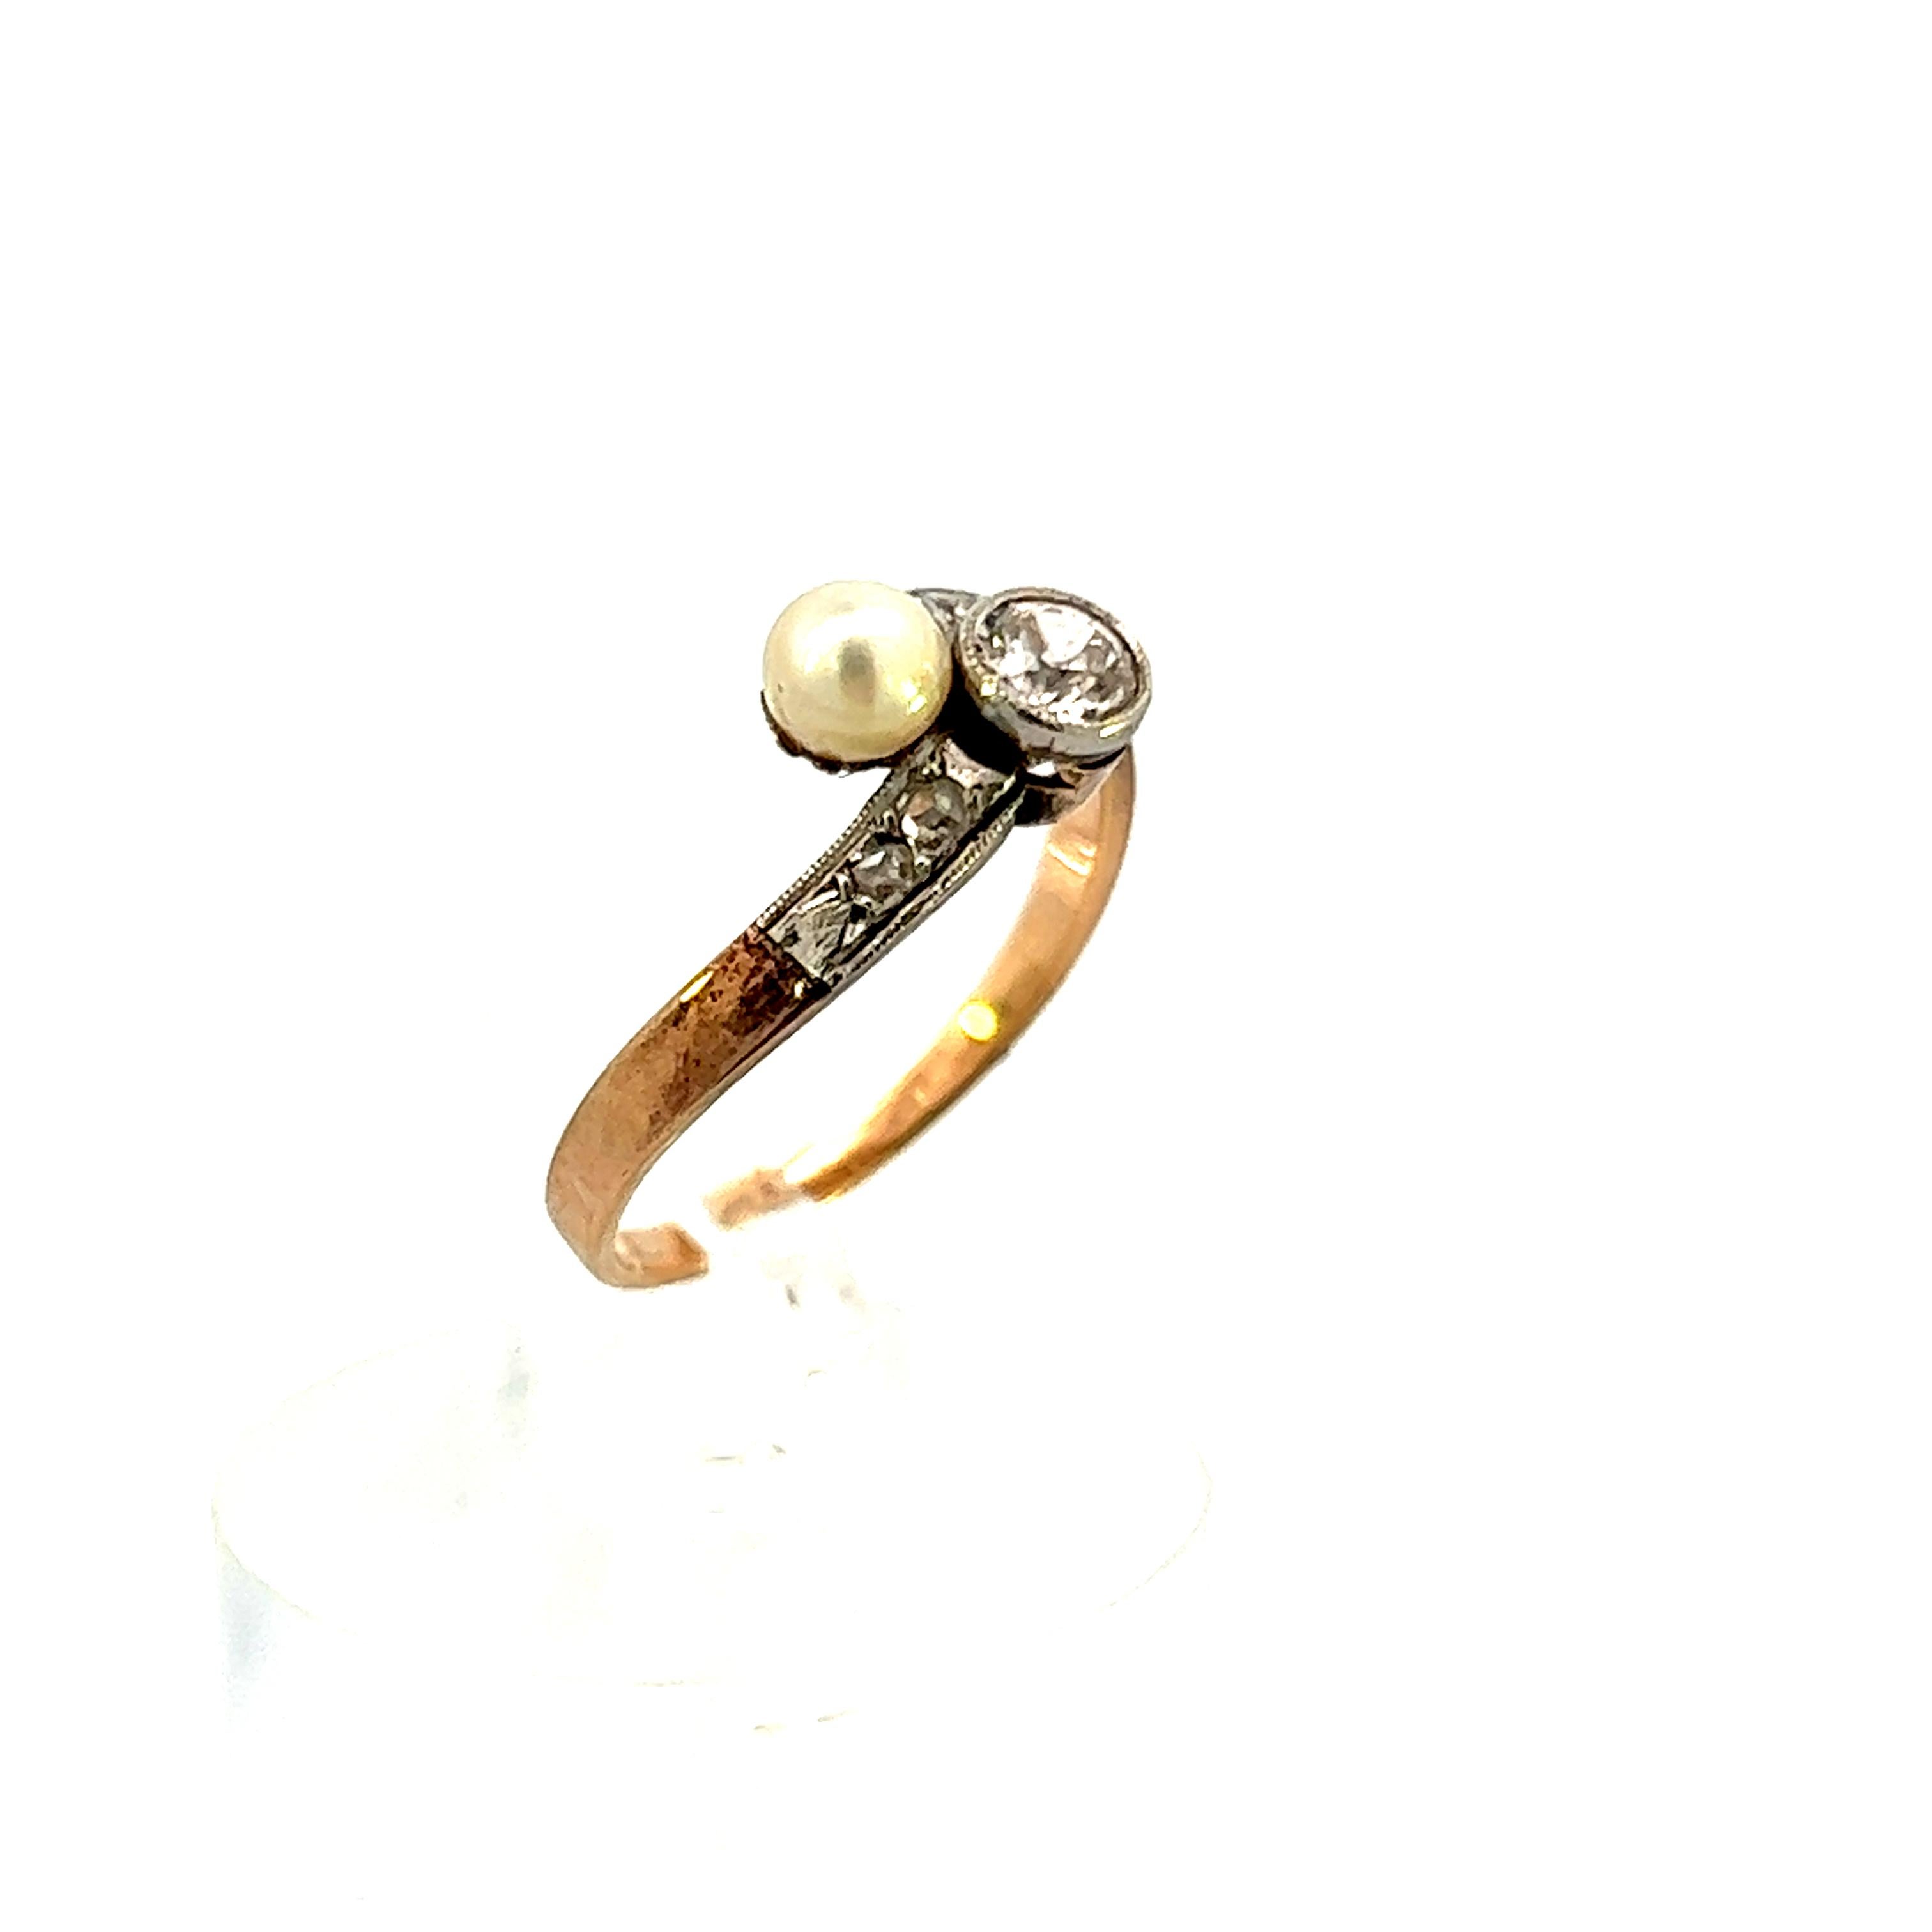 1925 Art Deco Platinum Diamond & Pearl Bypass Ring - Platinum Over Gold  In Excellent Condition For Sale In Lexington, KY